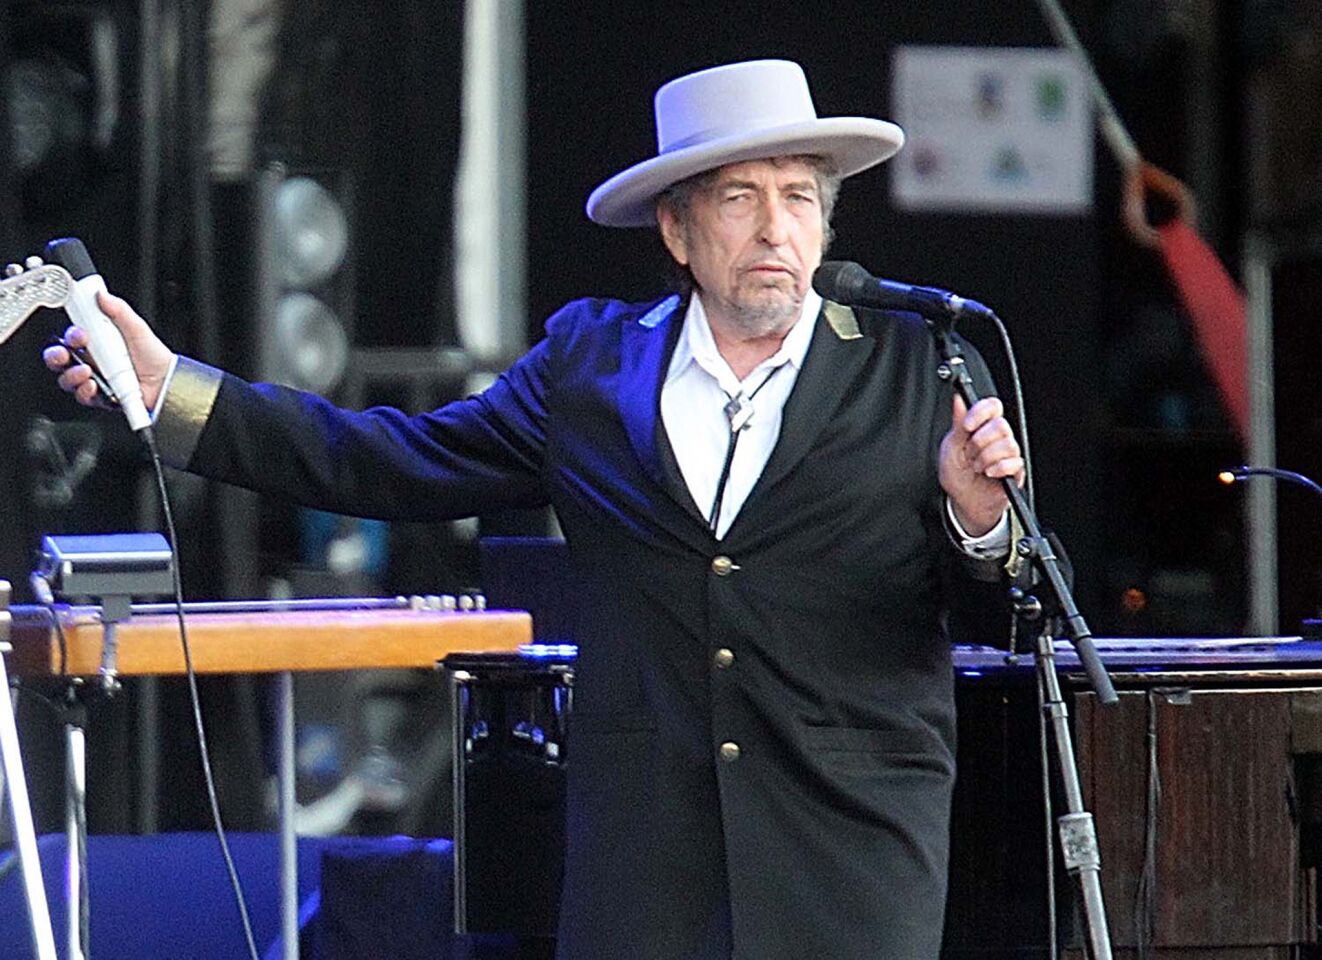 Dylan -- seen at Les Vieilles Charrues Festival in Carhaix, France, in December 2013 -- continues to perform on what's been dubbed "The Never Ending Tour."